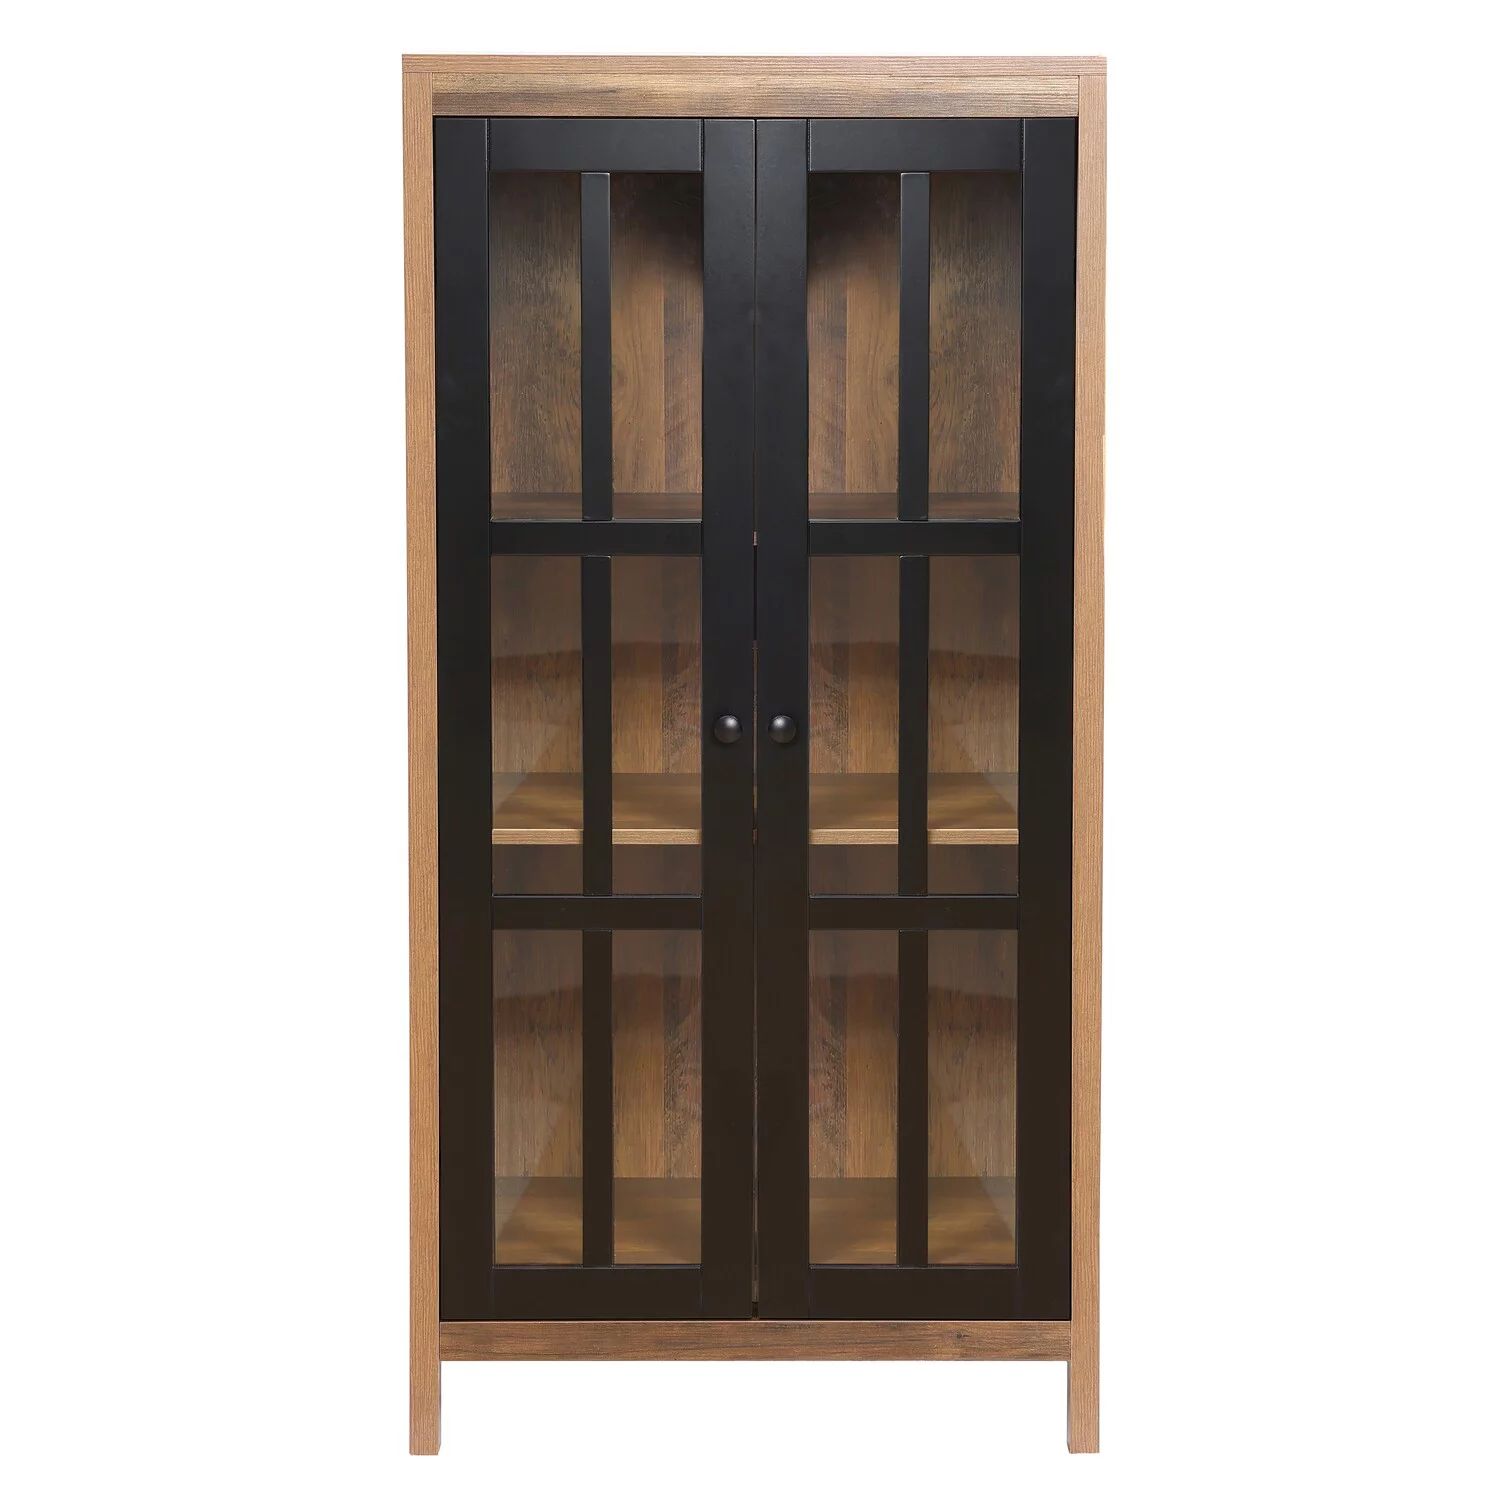 LuxenHome Natural Wood Glass Doors 47.25" H Accent Curio Cabinet | Walmart (US)